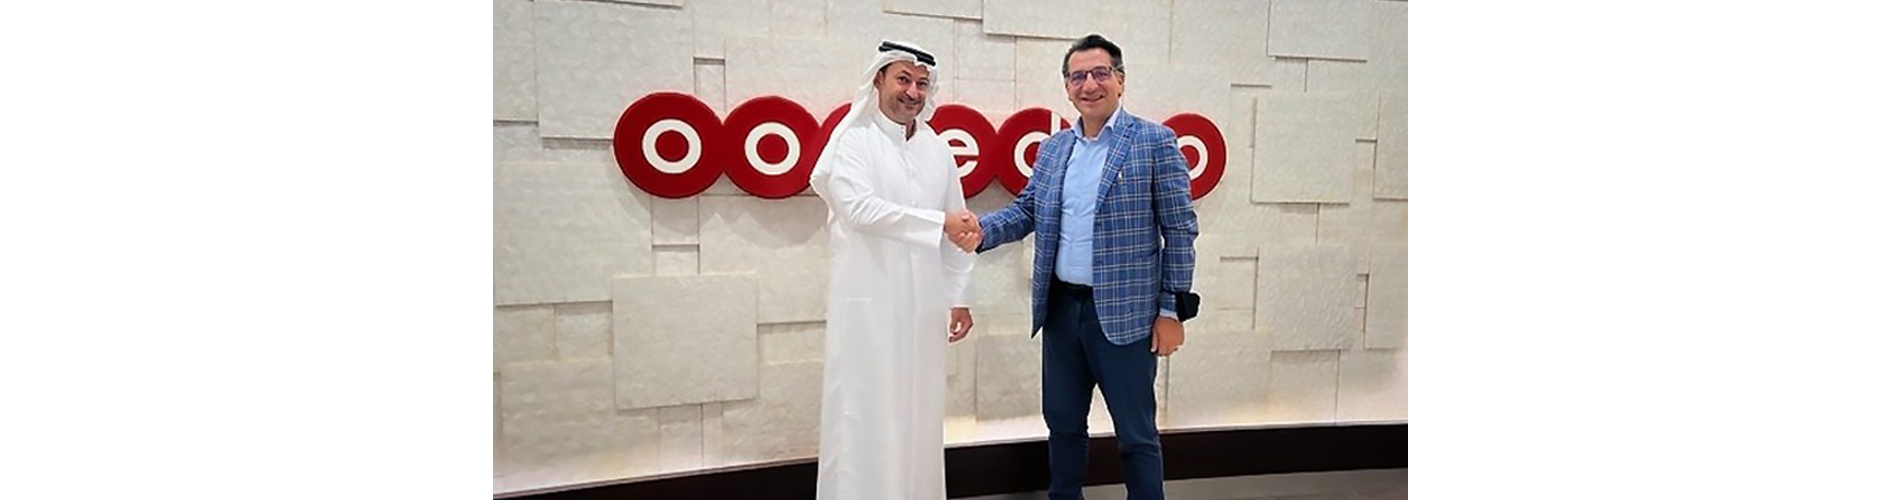 Ooredoo Group enhances customer experience with new solutions in Artificial Intelligence, Machine Learning, and Fraud protection